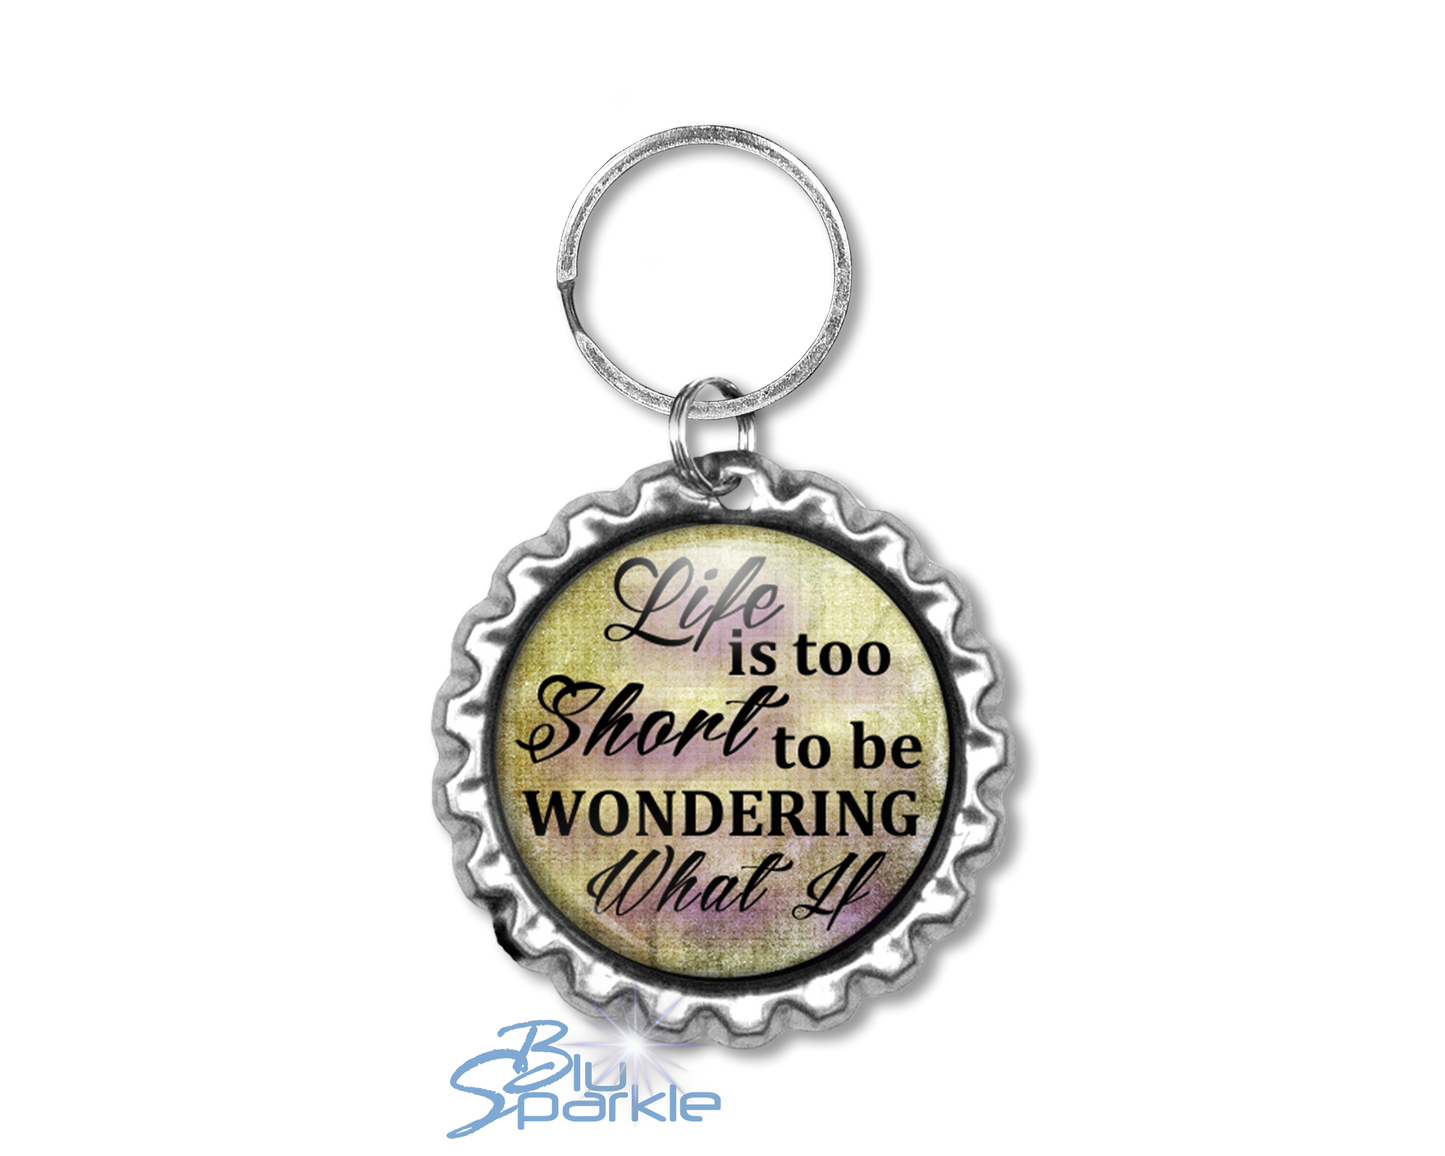 Life Is Too Short To Be Wondering What If - Key Chains